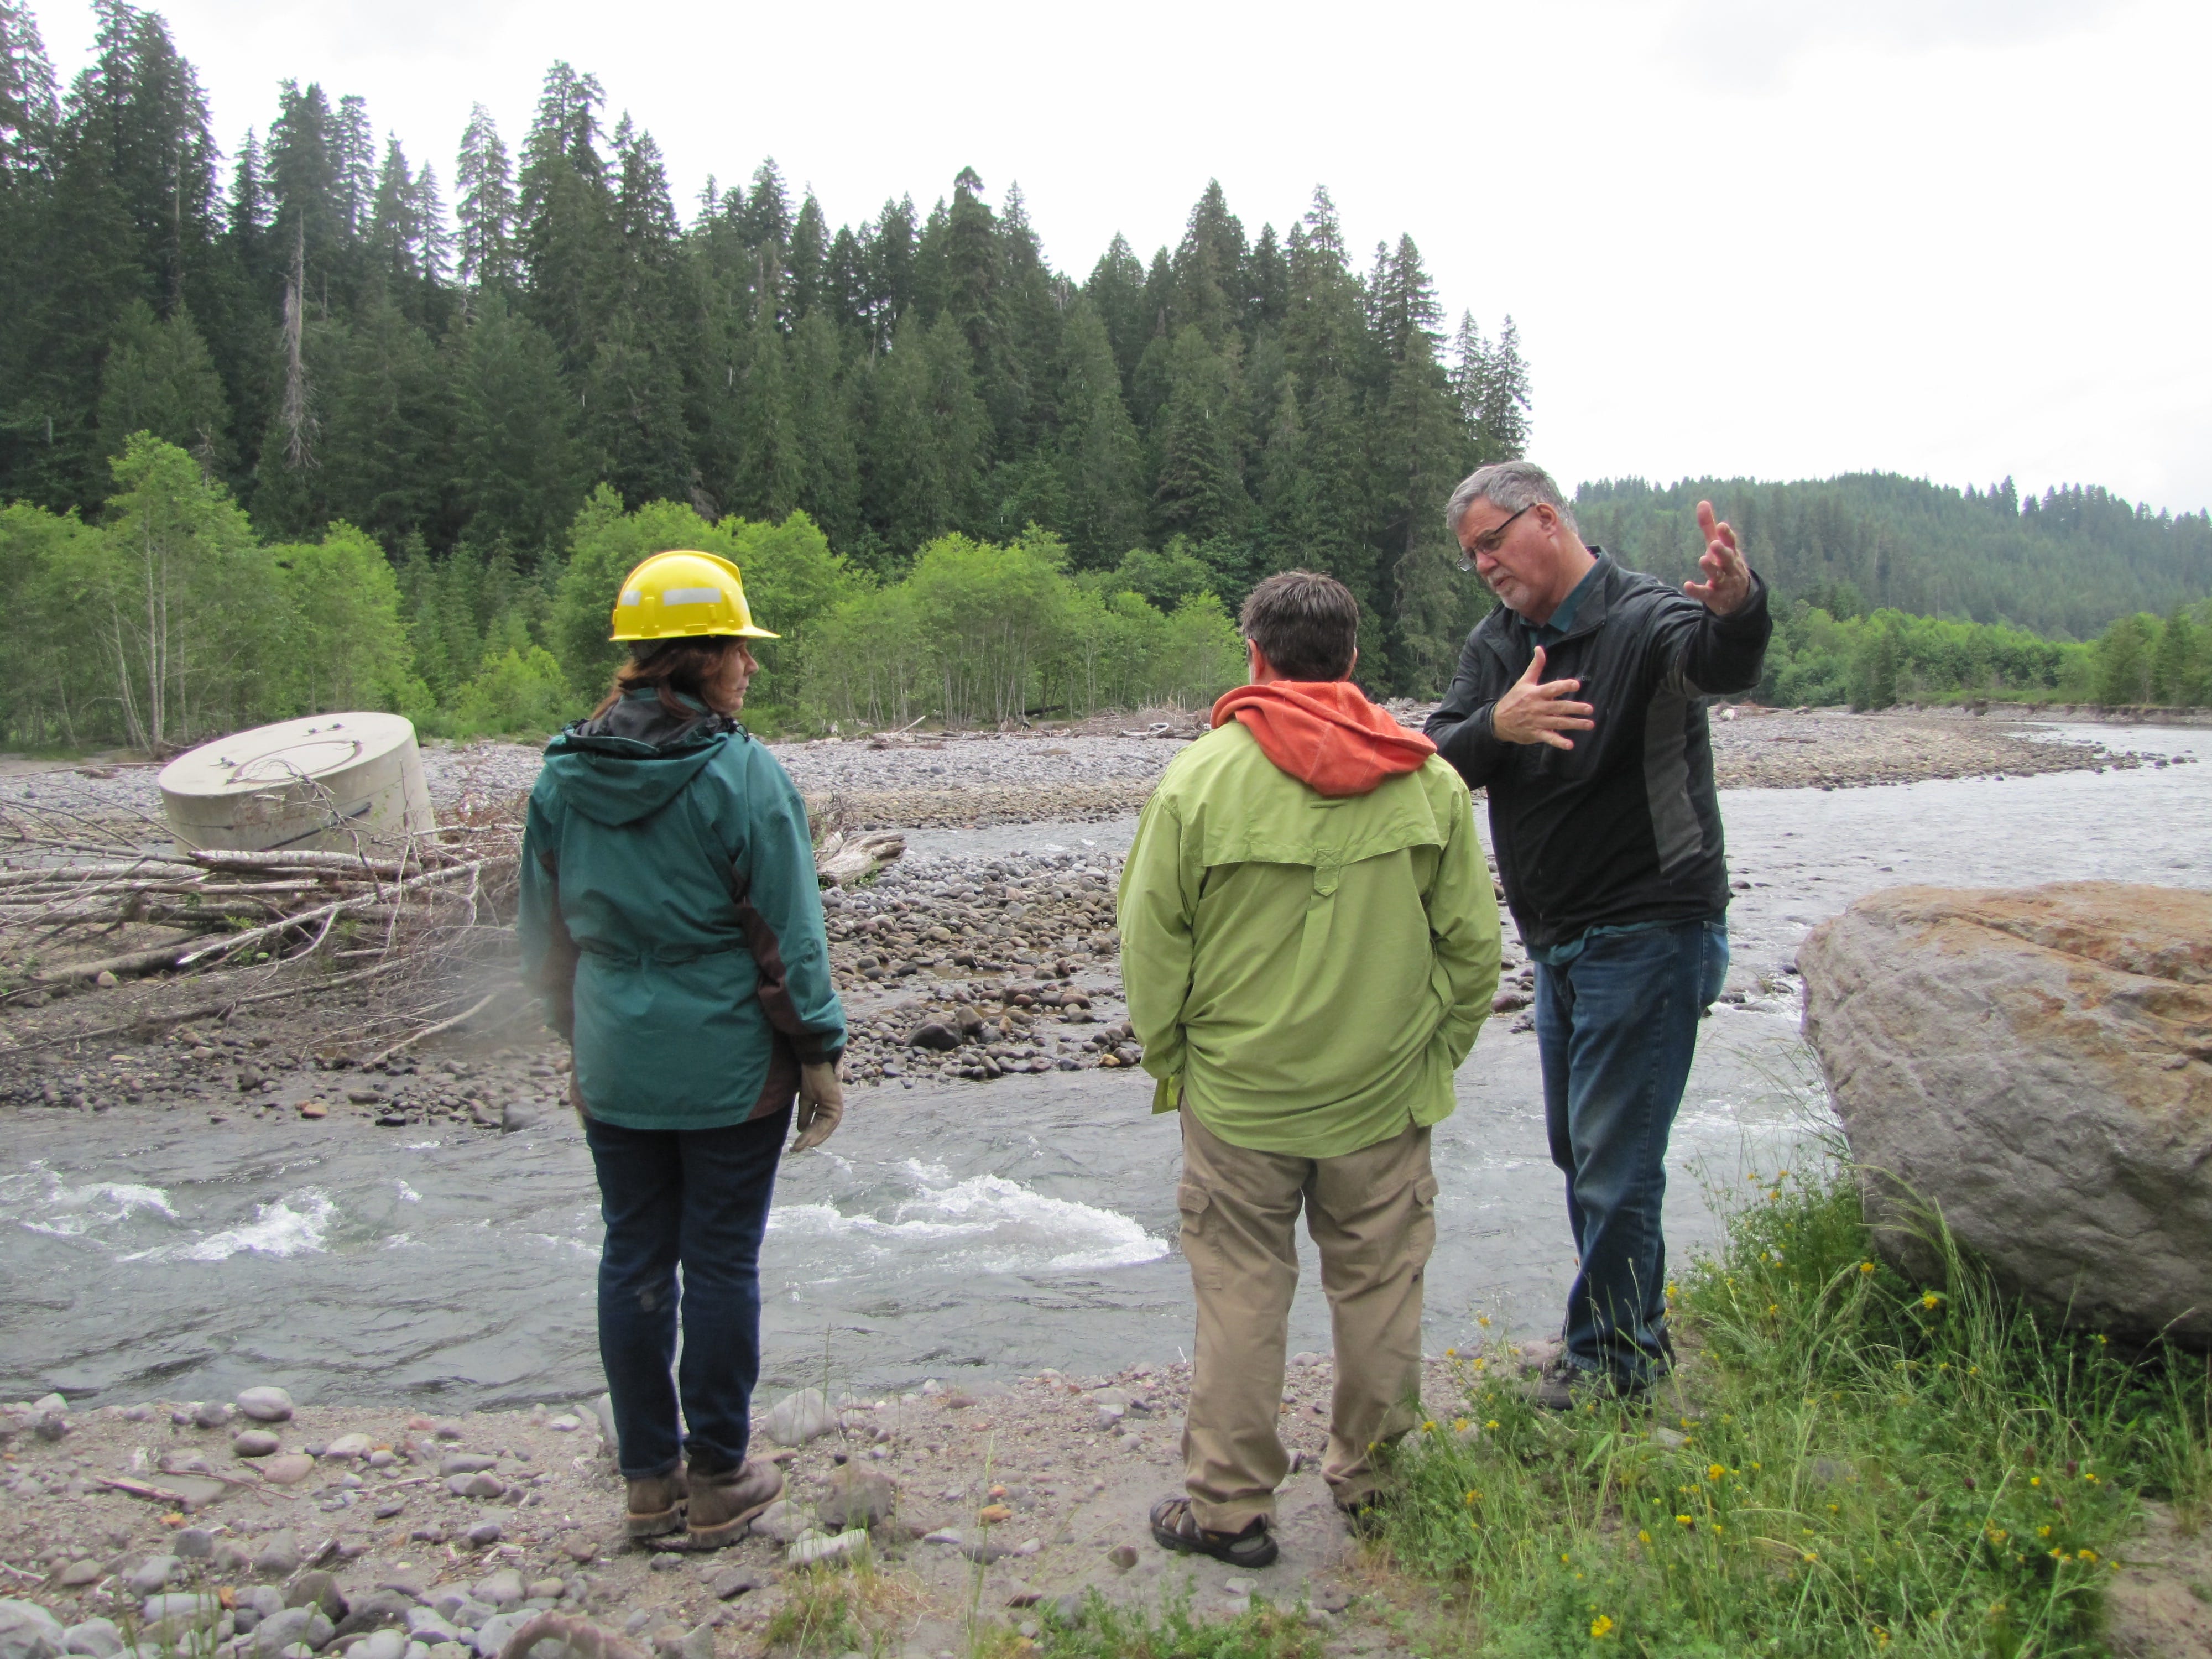 Frank Shrier, right, of PacifiCorp explains the design of the Muddy River acclimation pond to Michelle Day, center, of the National Marine Fisheries Service and Ruth Tracy of the Gifford Pinchot National Forest. The damaged infiltration system that once was on the shore is on the left side of the photo and now in the middle of the river.